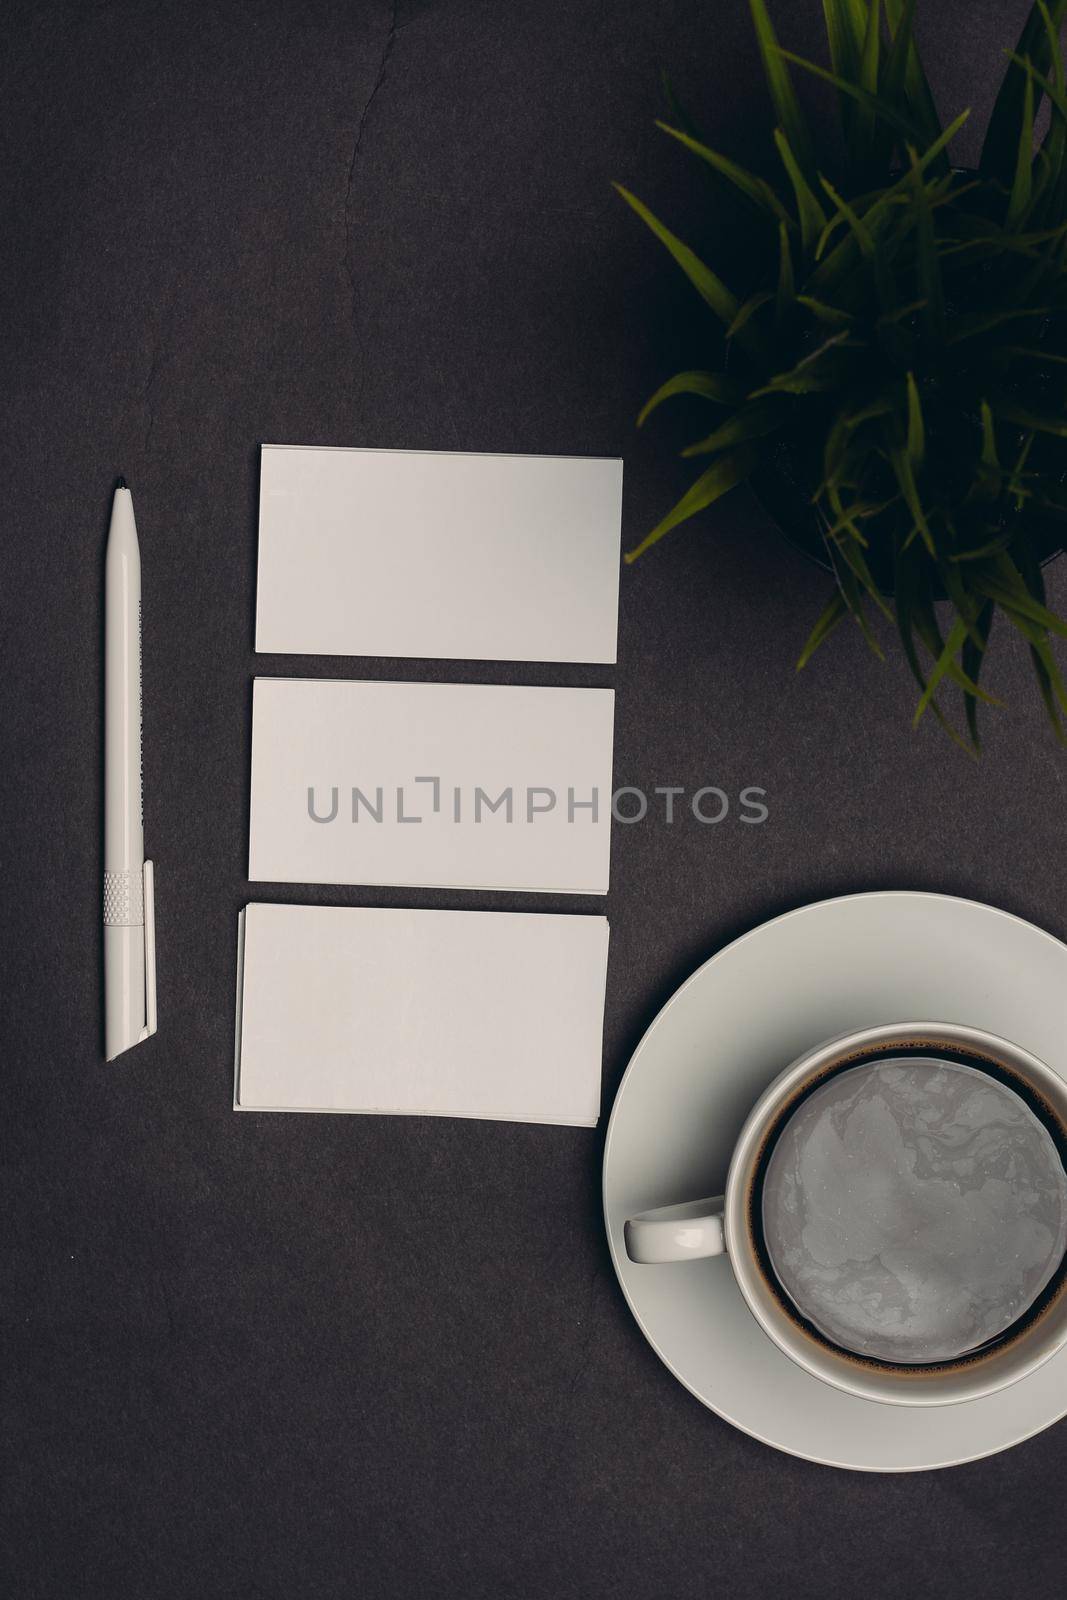 business cards on table and coffee cup pen top view. High quality photo